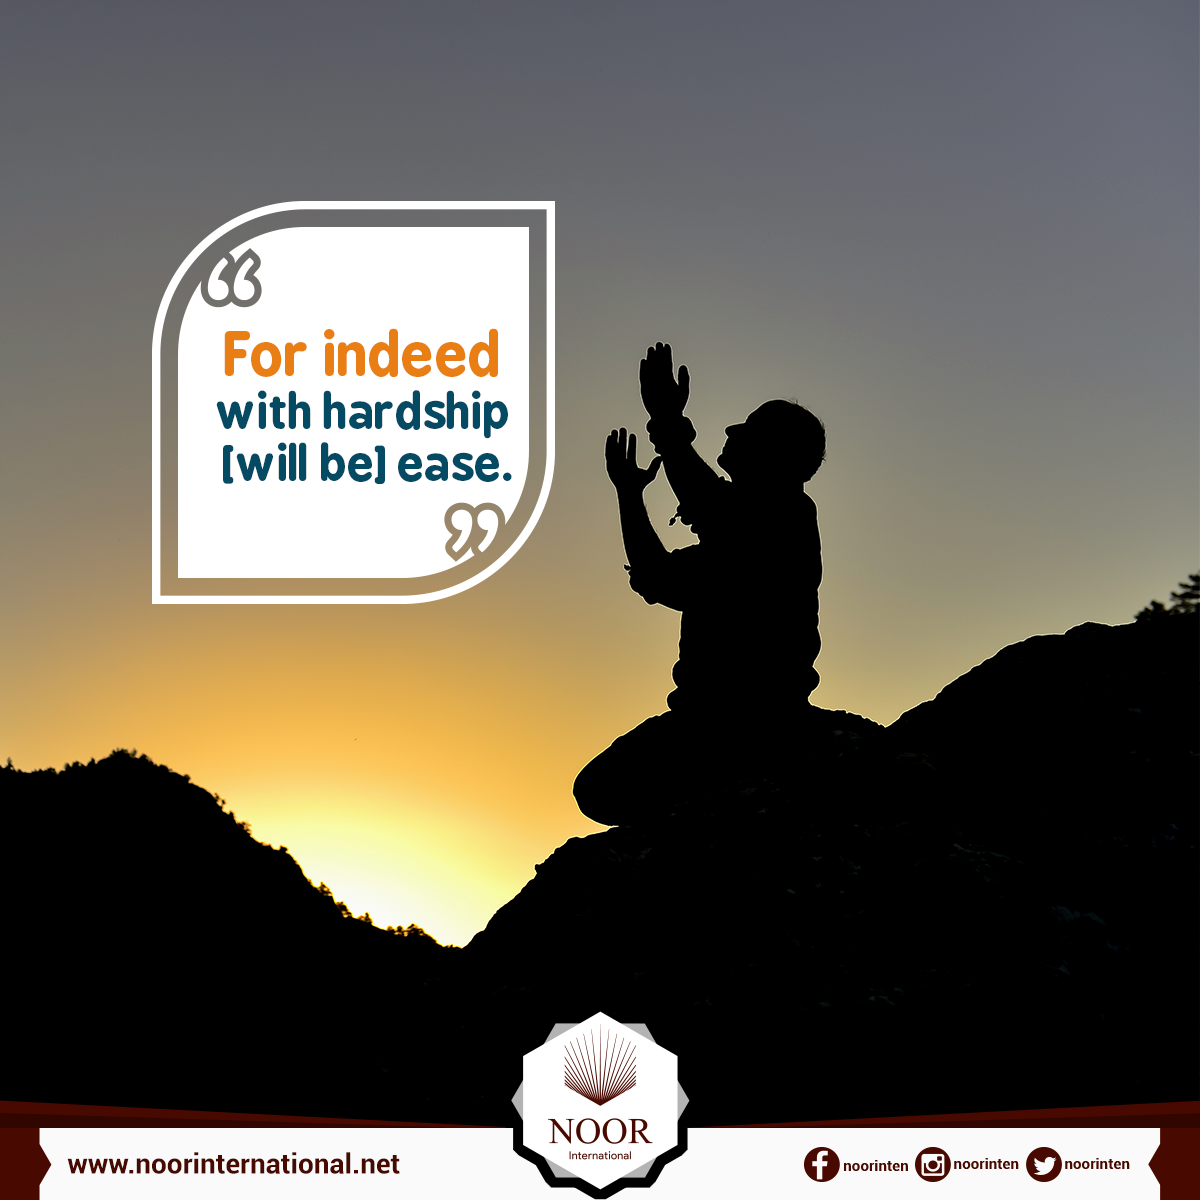 For indeed, with hardship [will be] ease.